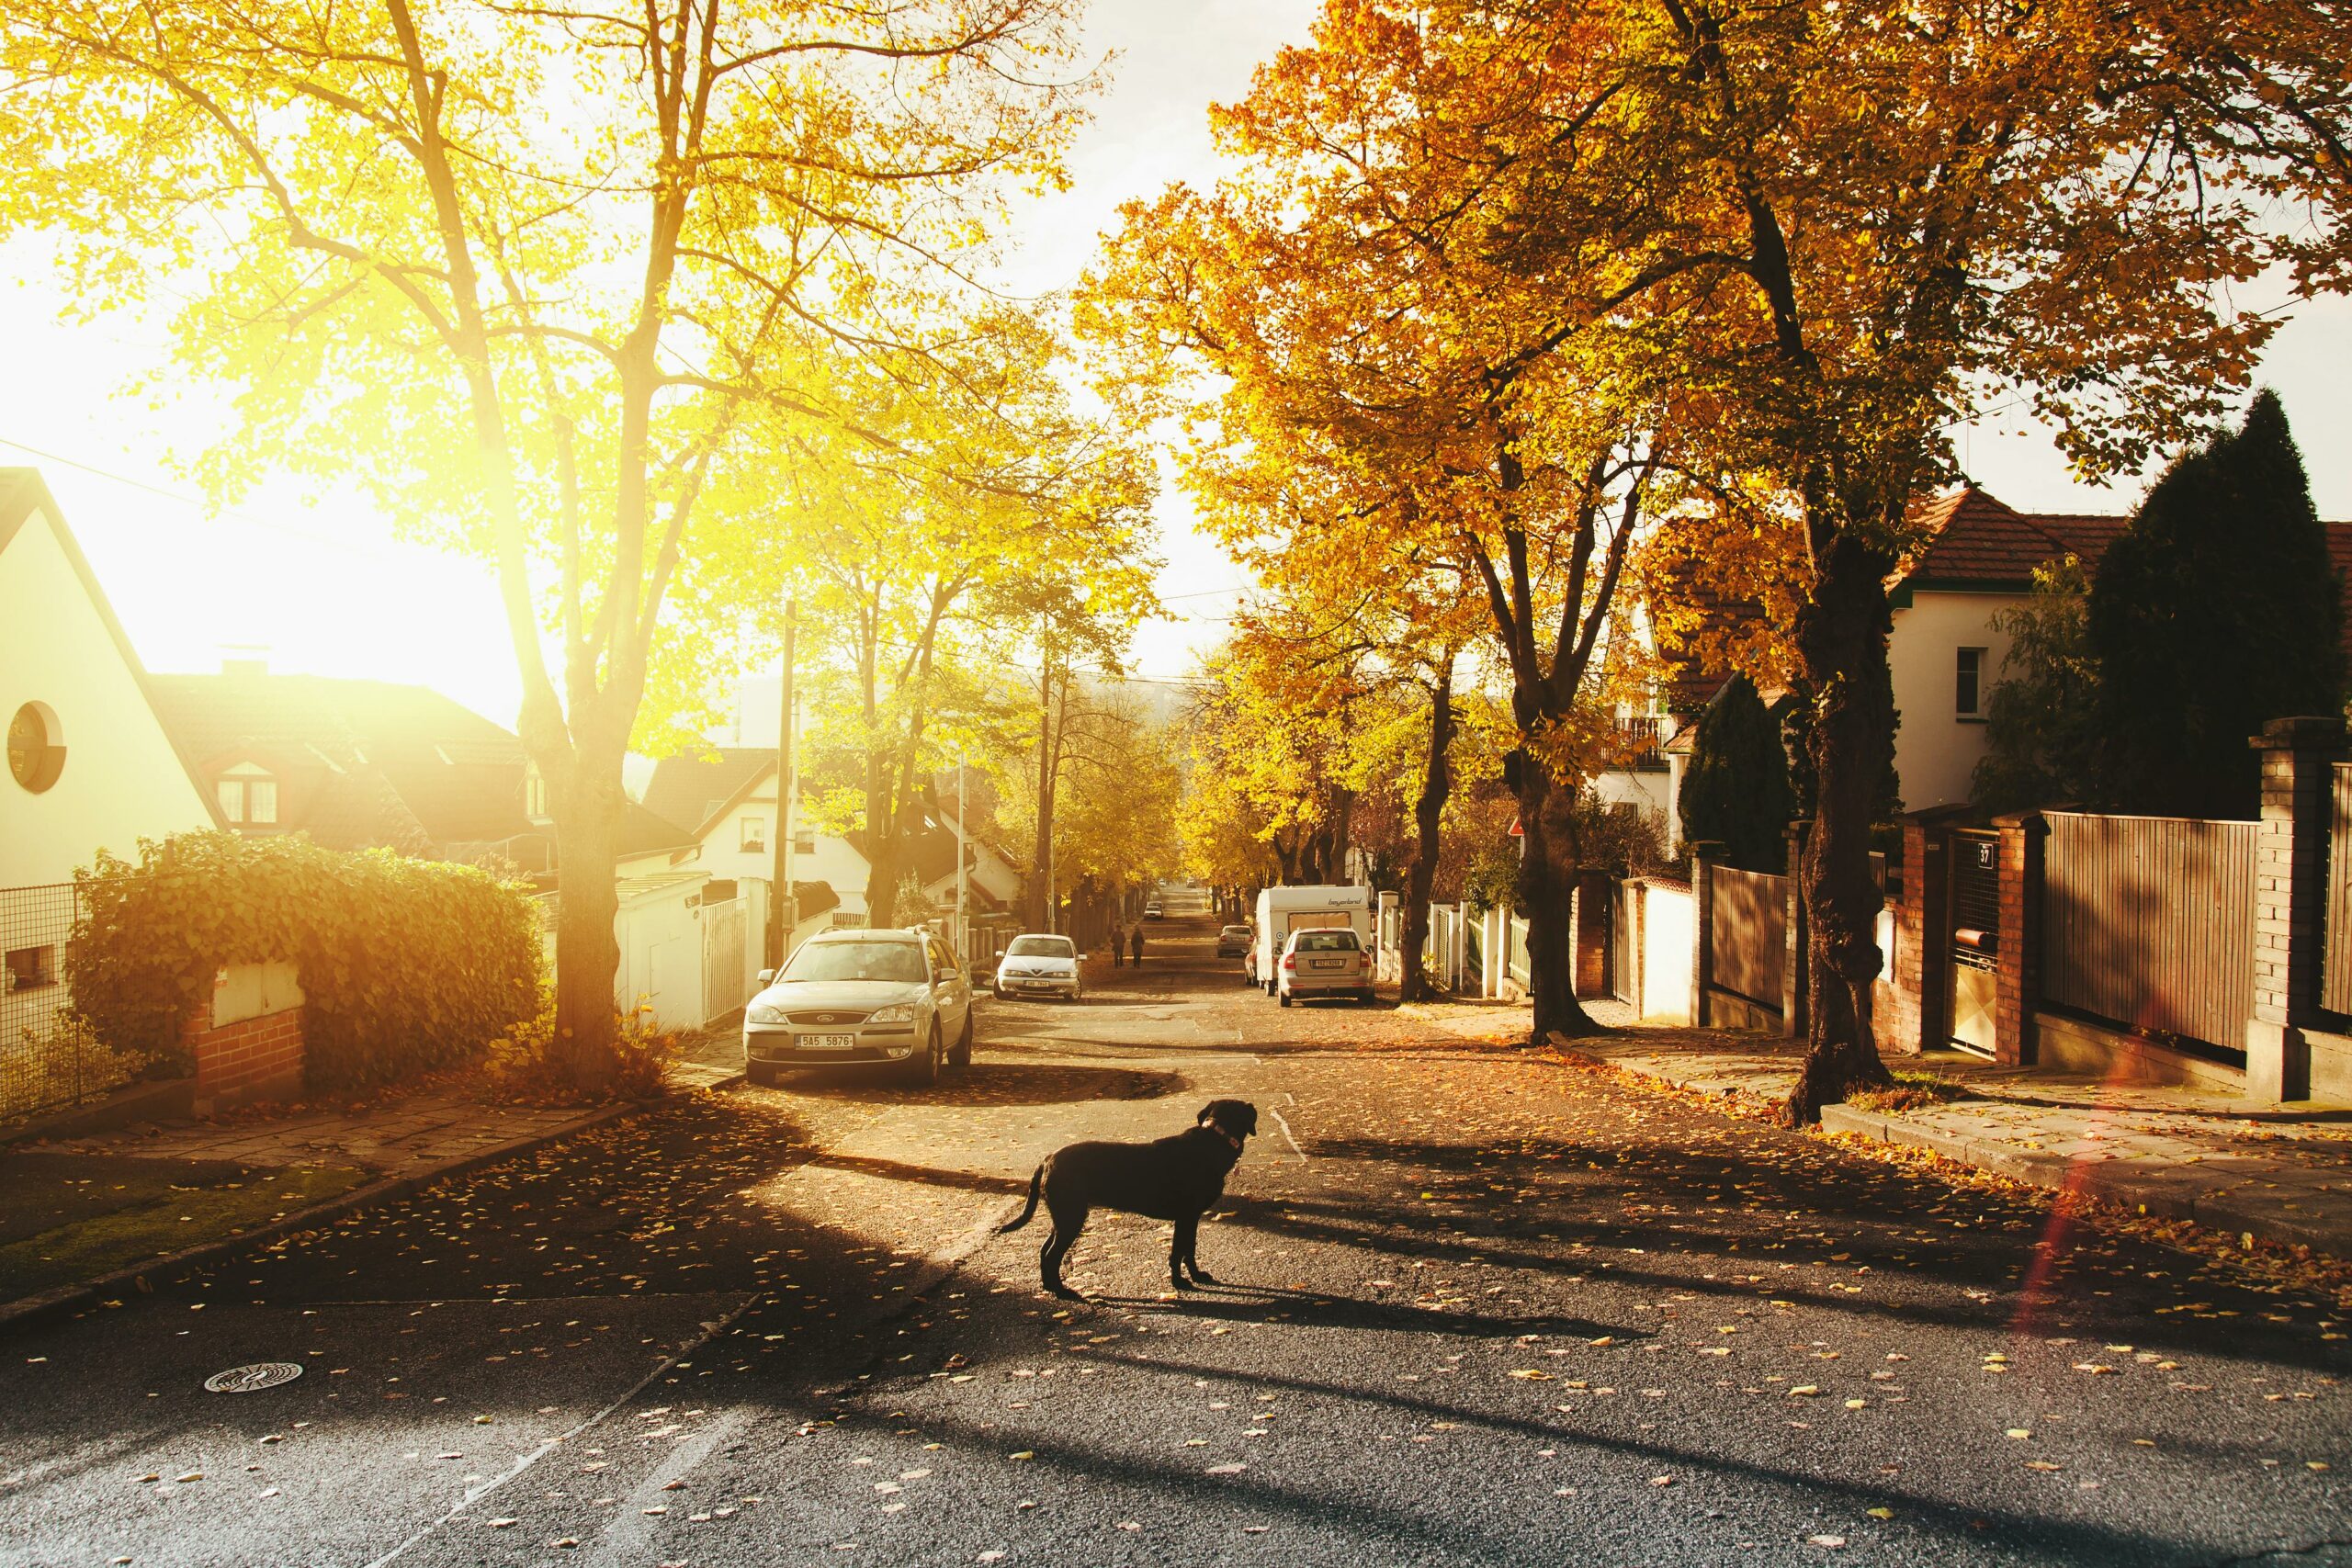 A black dog stands in the middle of a street with fall trees